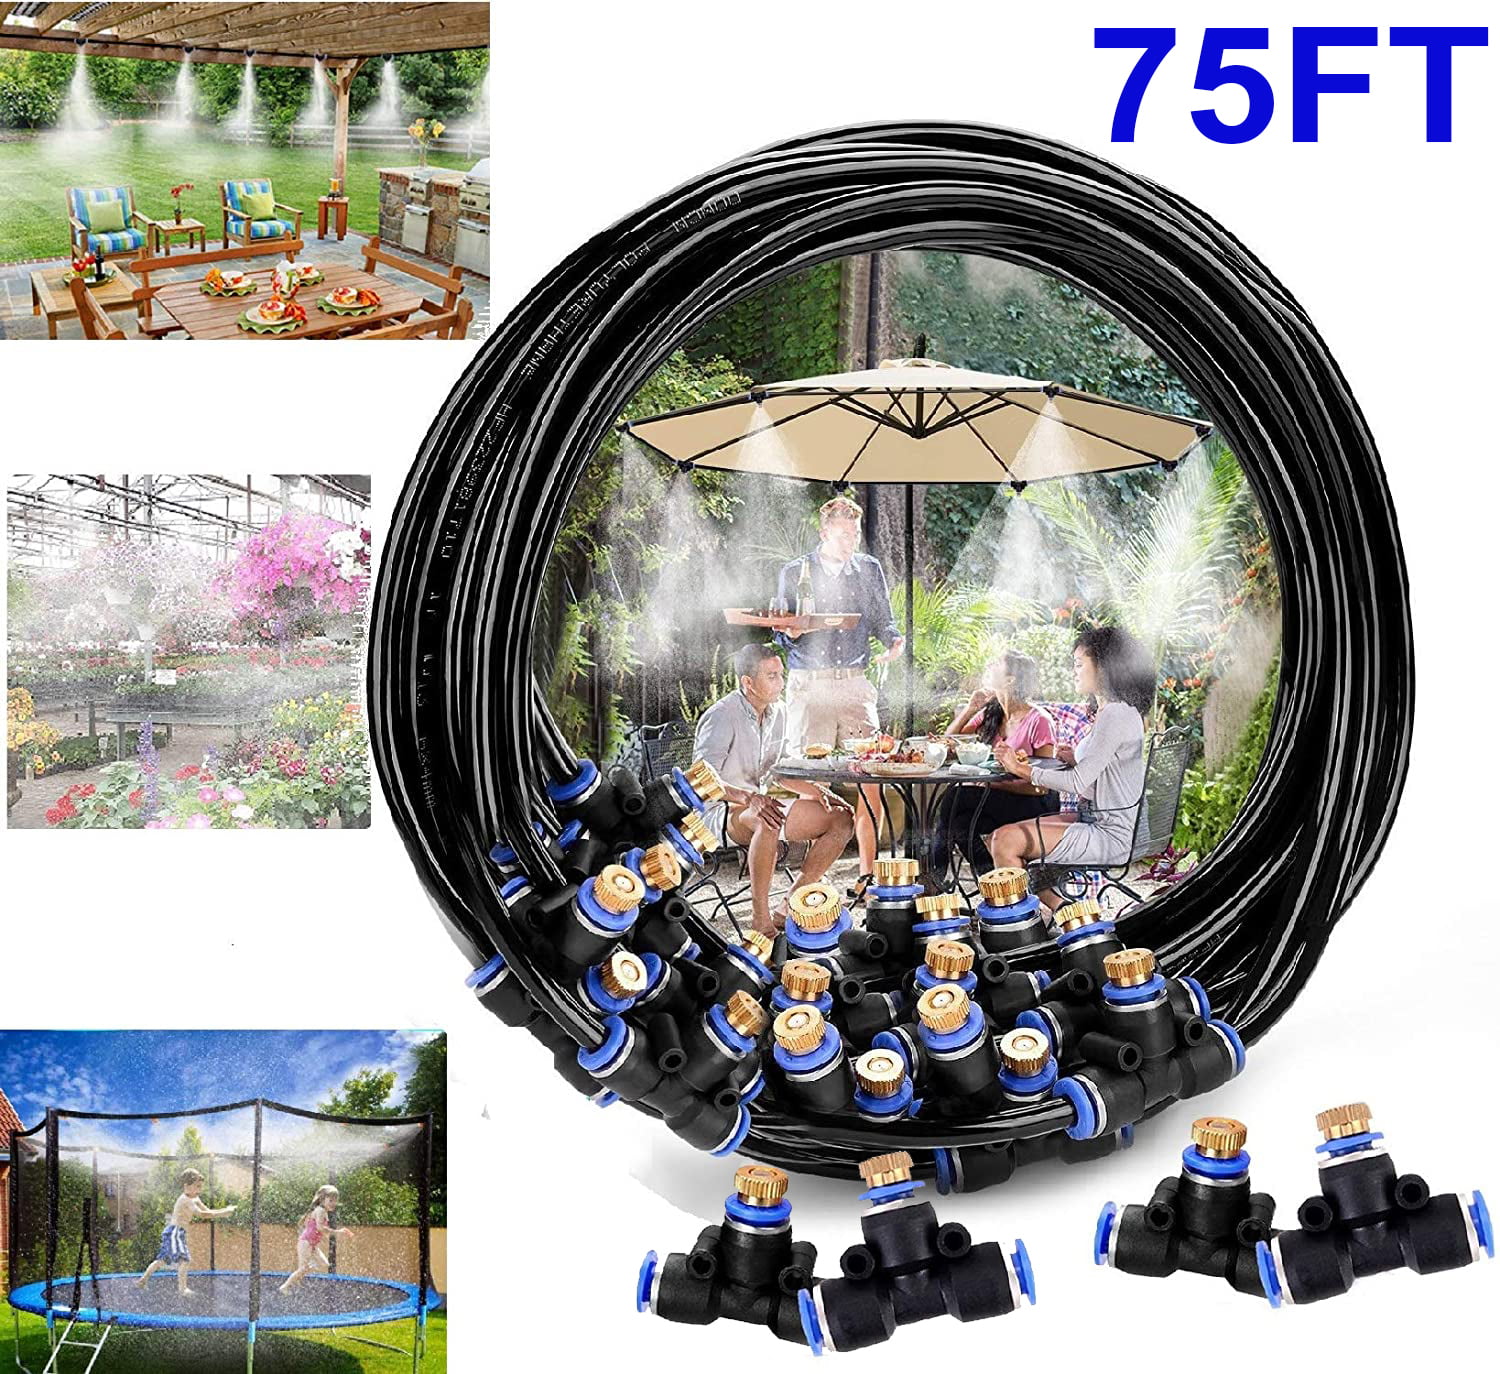 Misting Line 1/2 Gesentur Misting Cooling System Brass Faucet Adapter for Outdoor Patio Garden Home Irrigation Trampoline 26.2ft 8M 8 Metal Mist Nozzles 3/4 